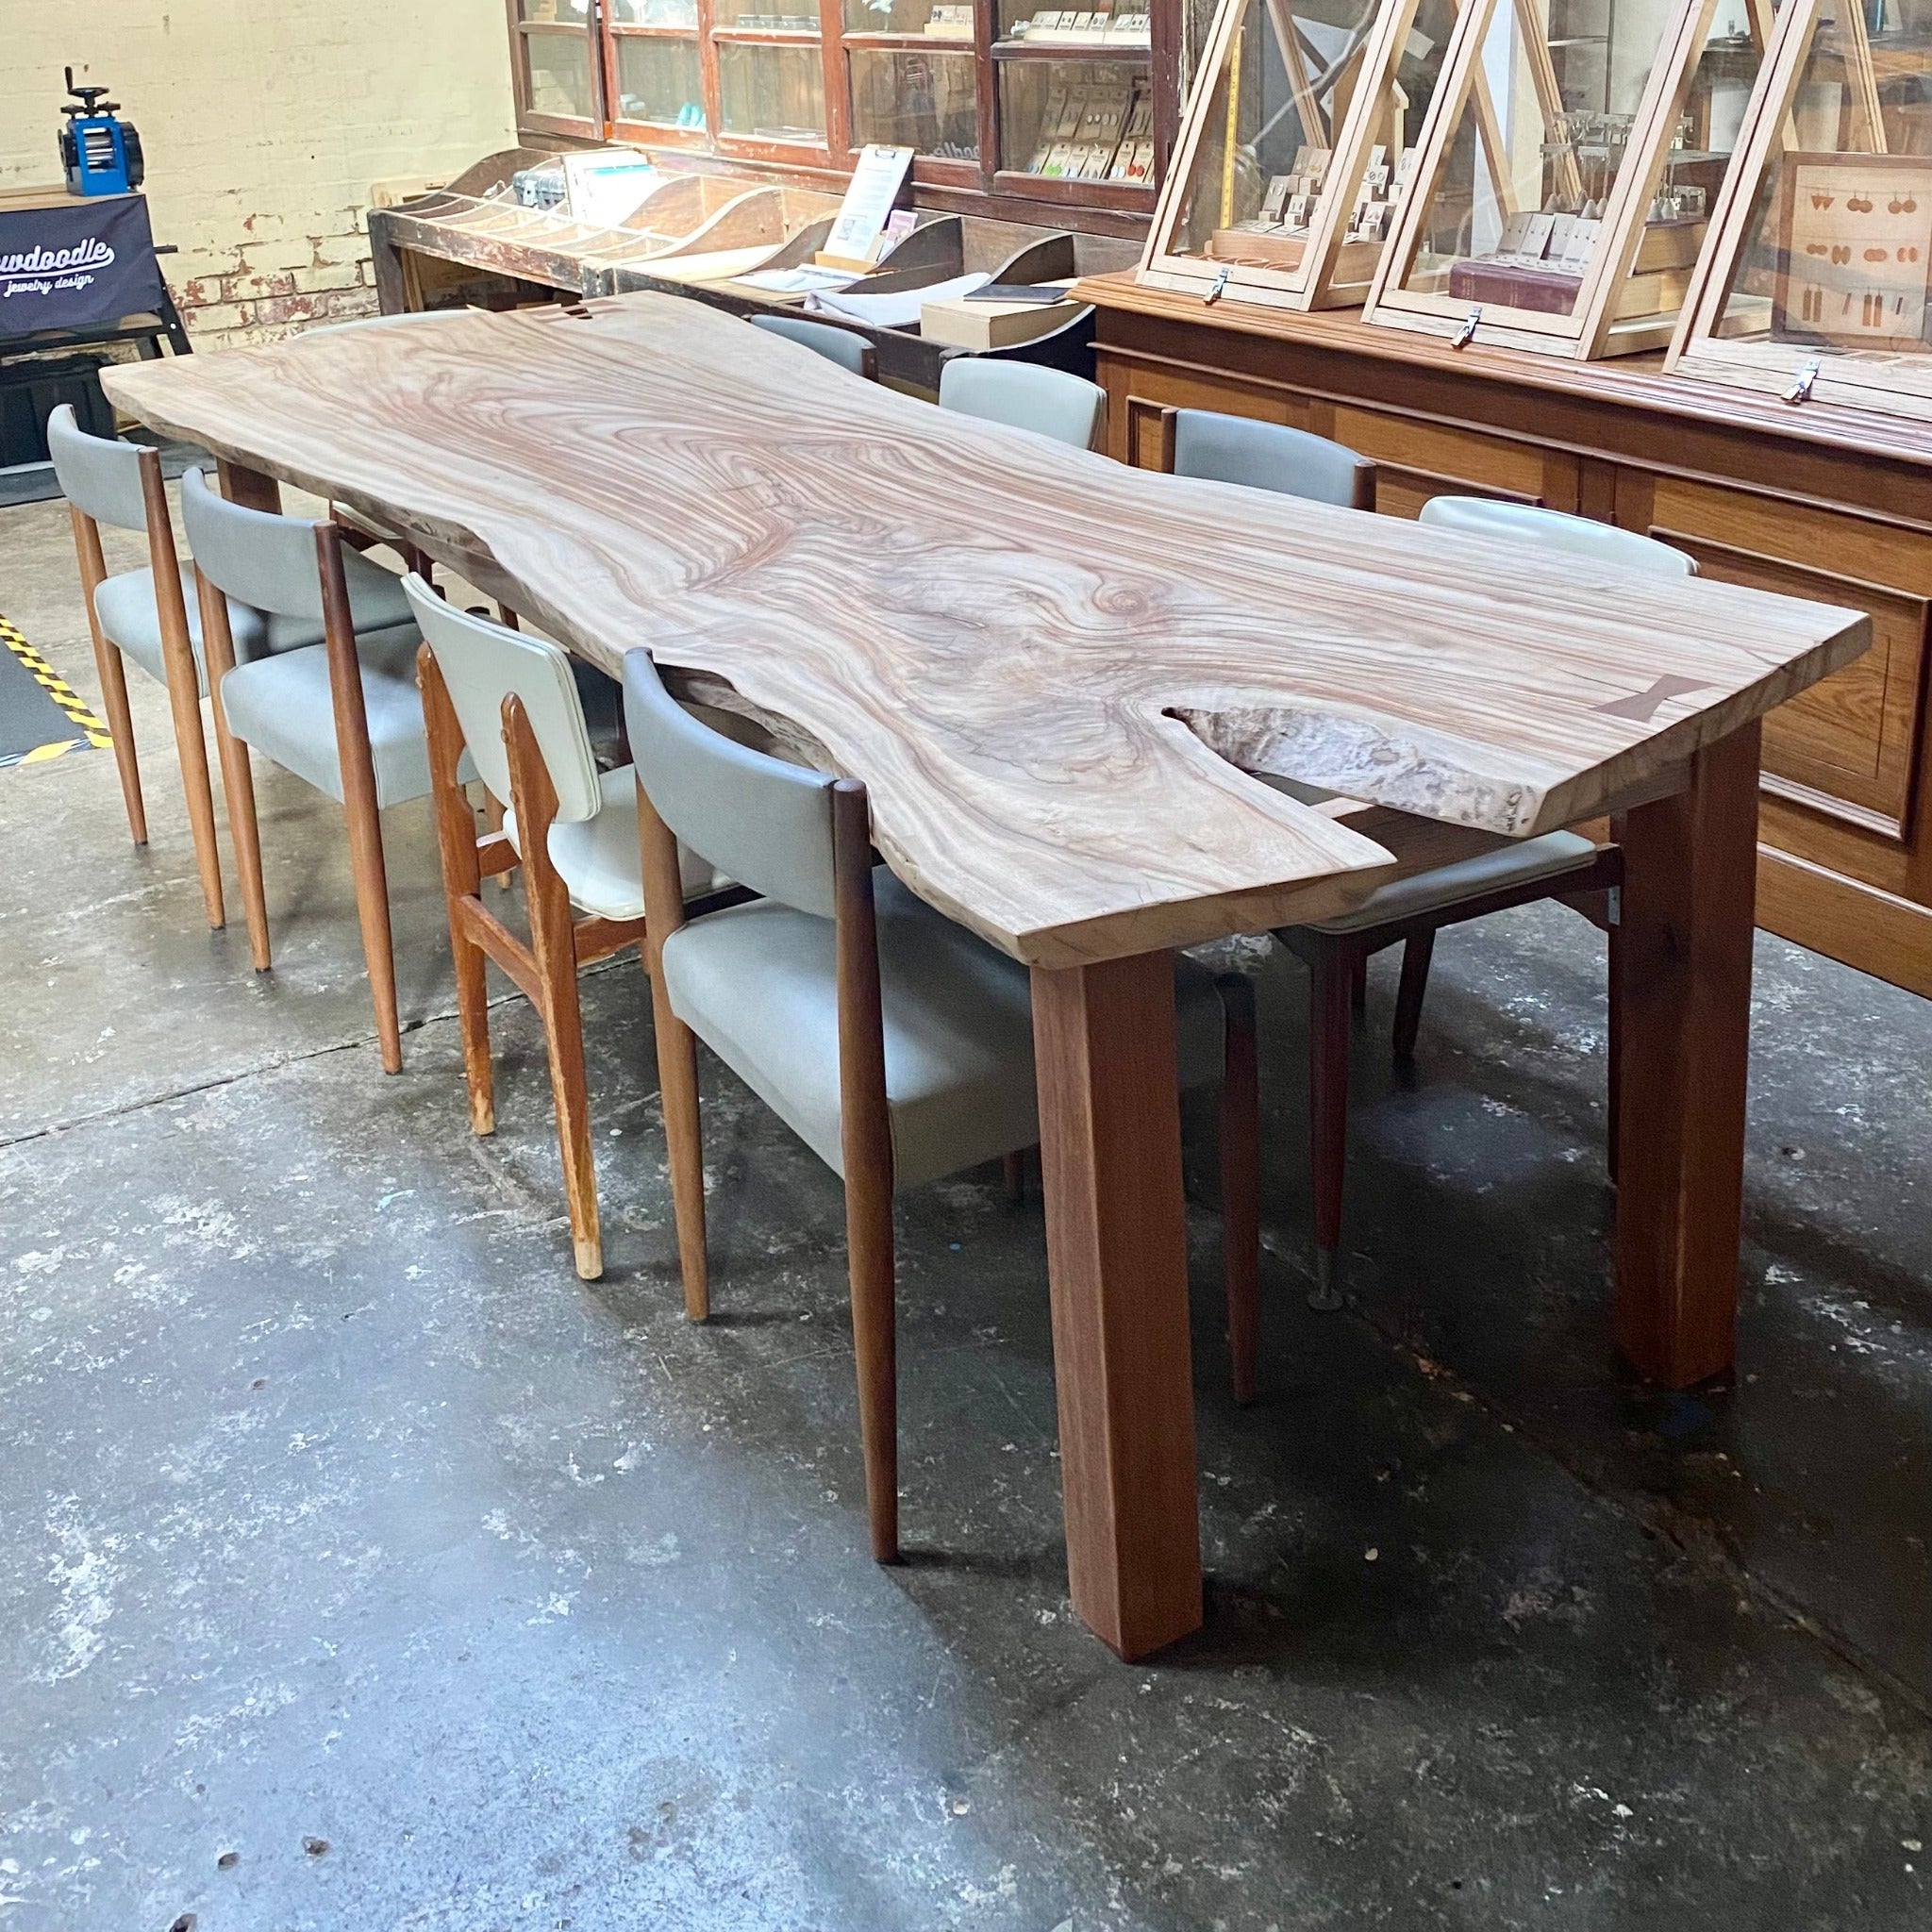 Upcycled 10 seater dining table in Melbourne Australia. Made from recycled hardwood. 